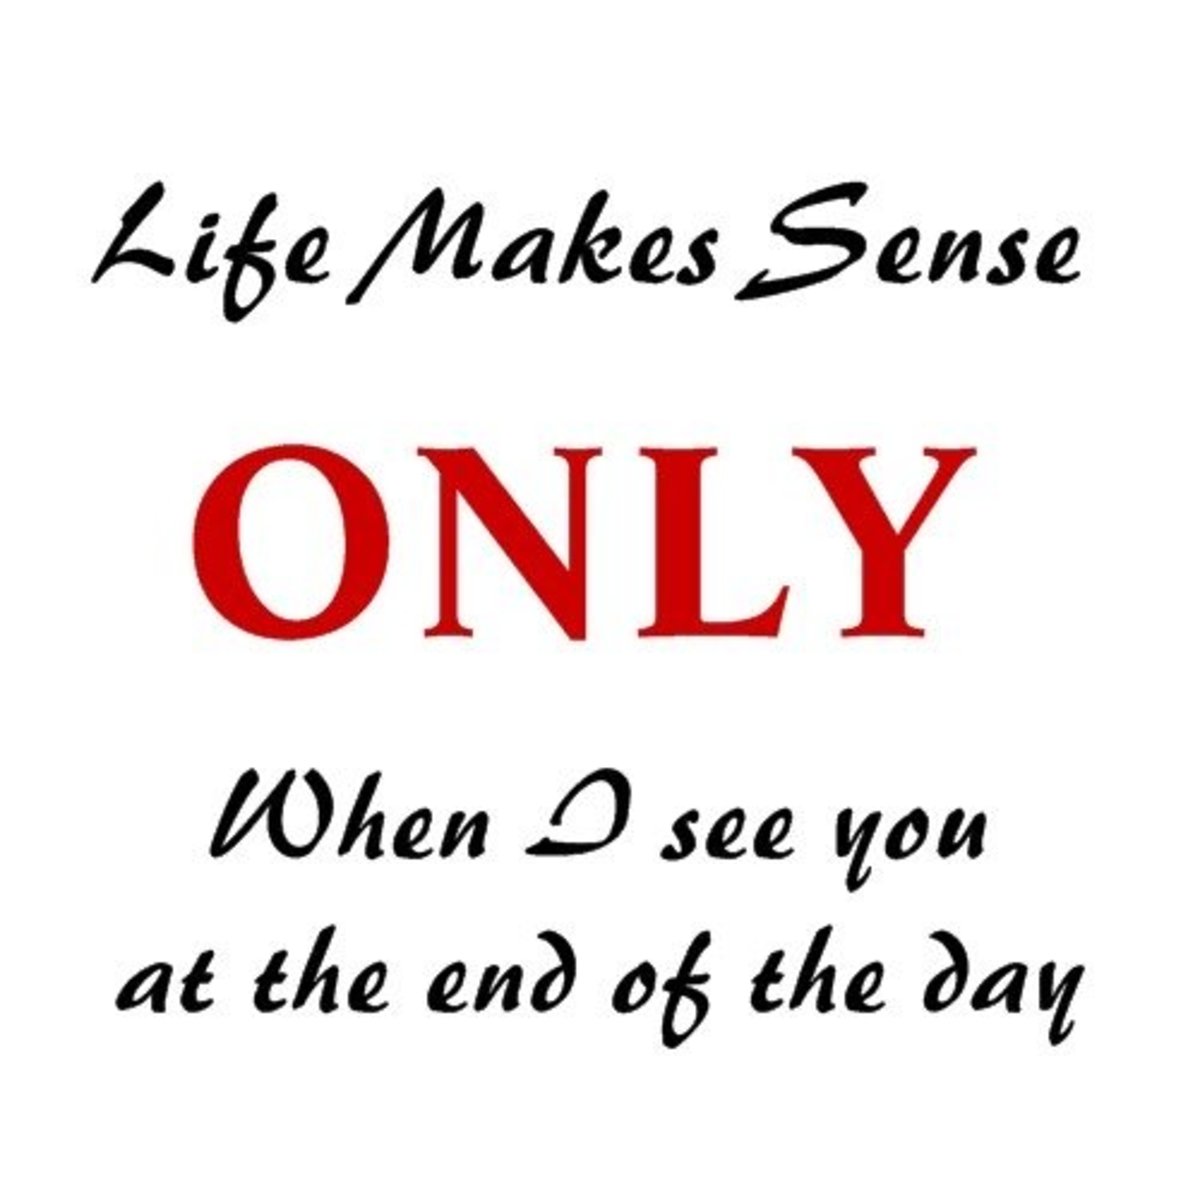 Life makes sense only when I see at the end of the day